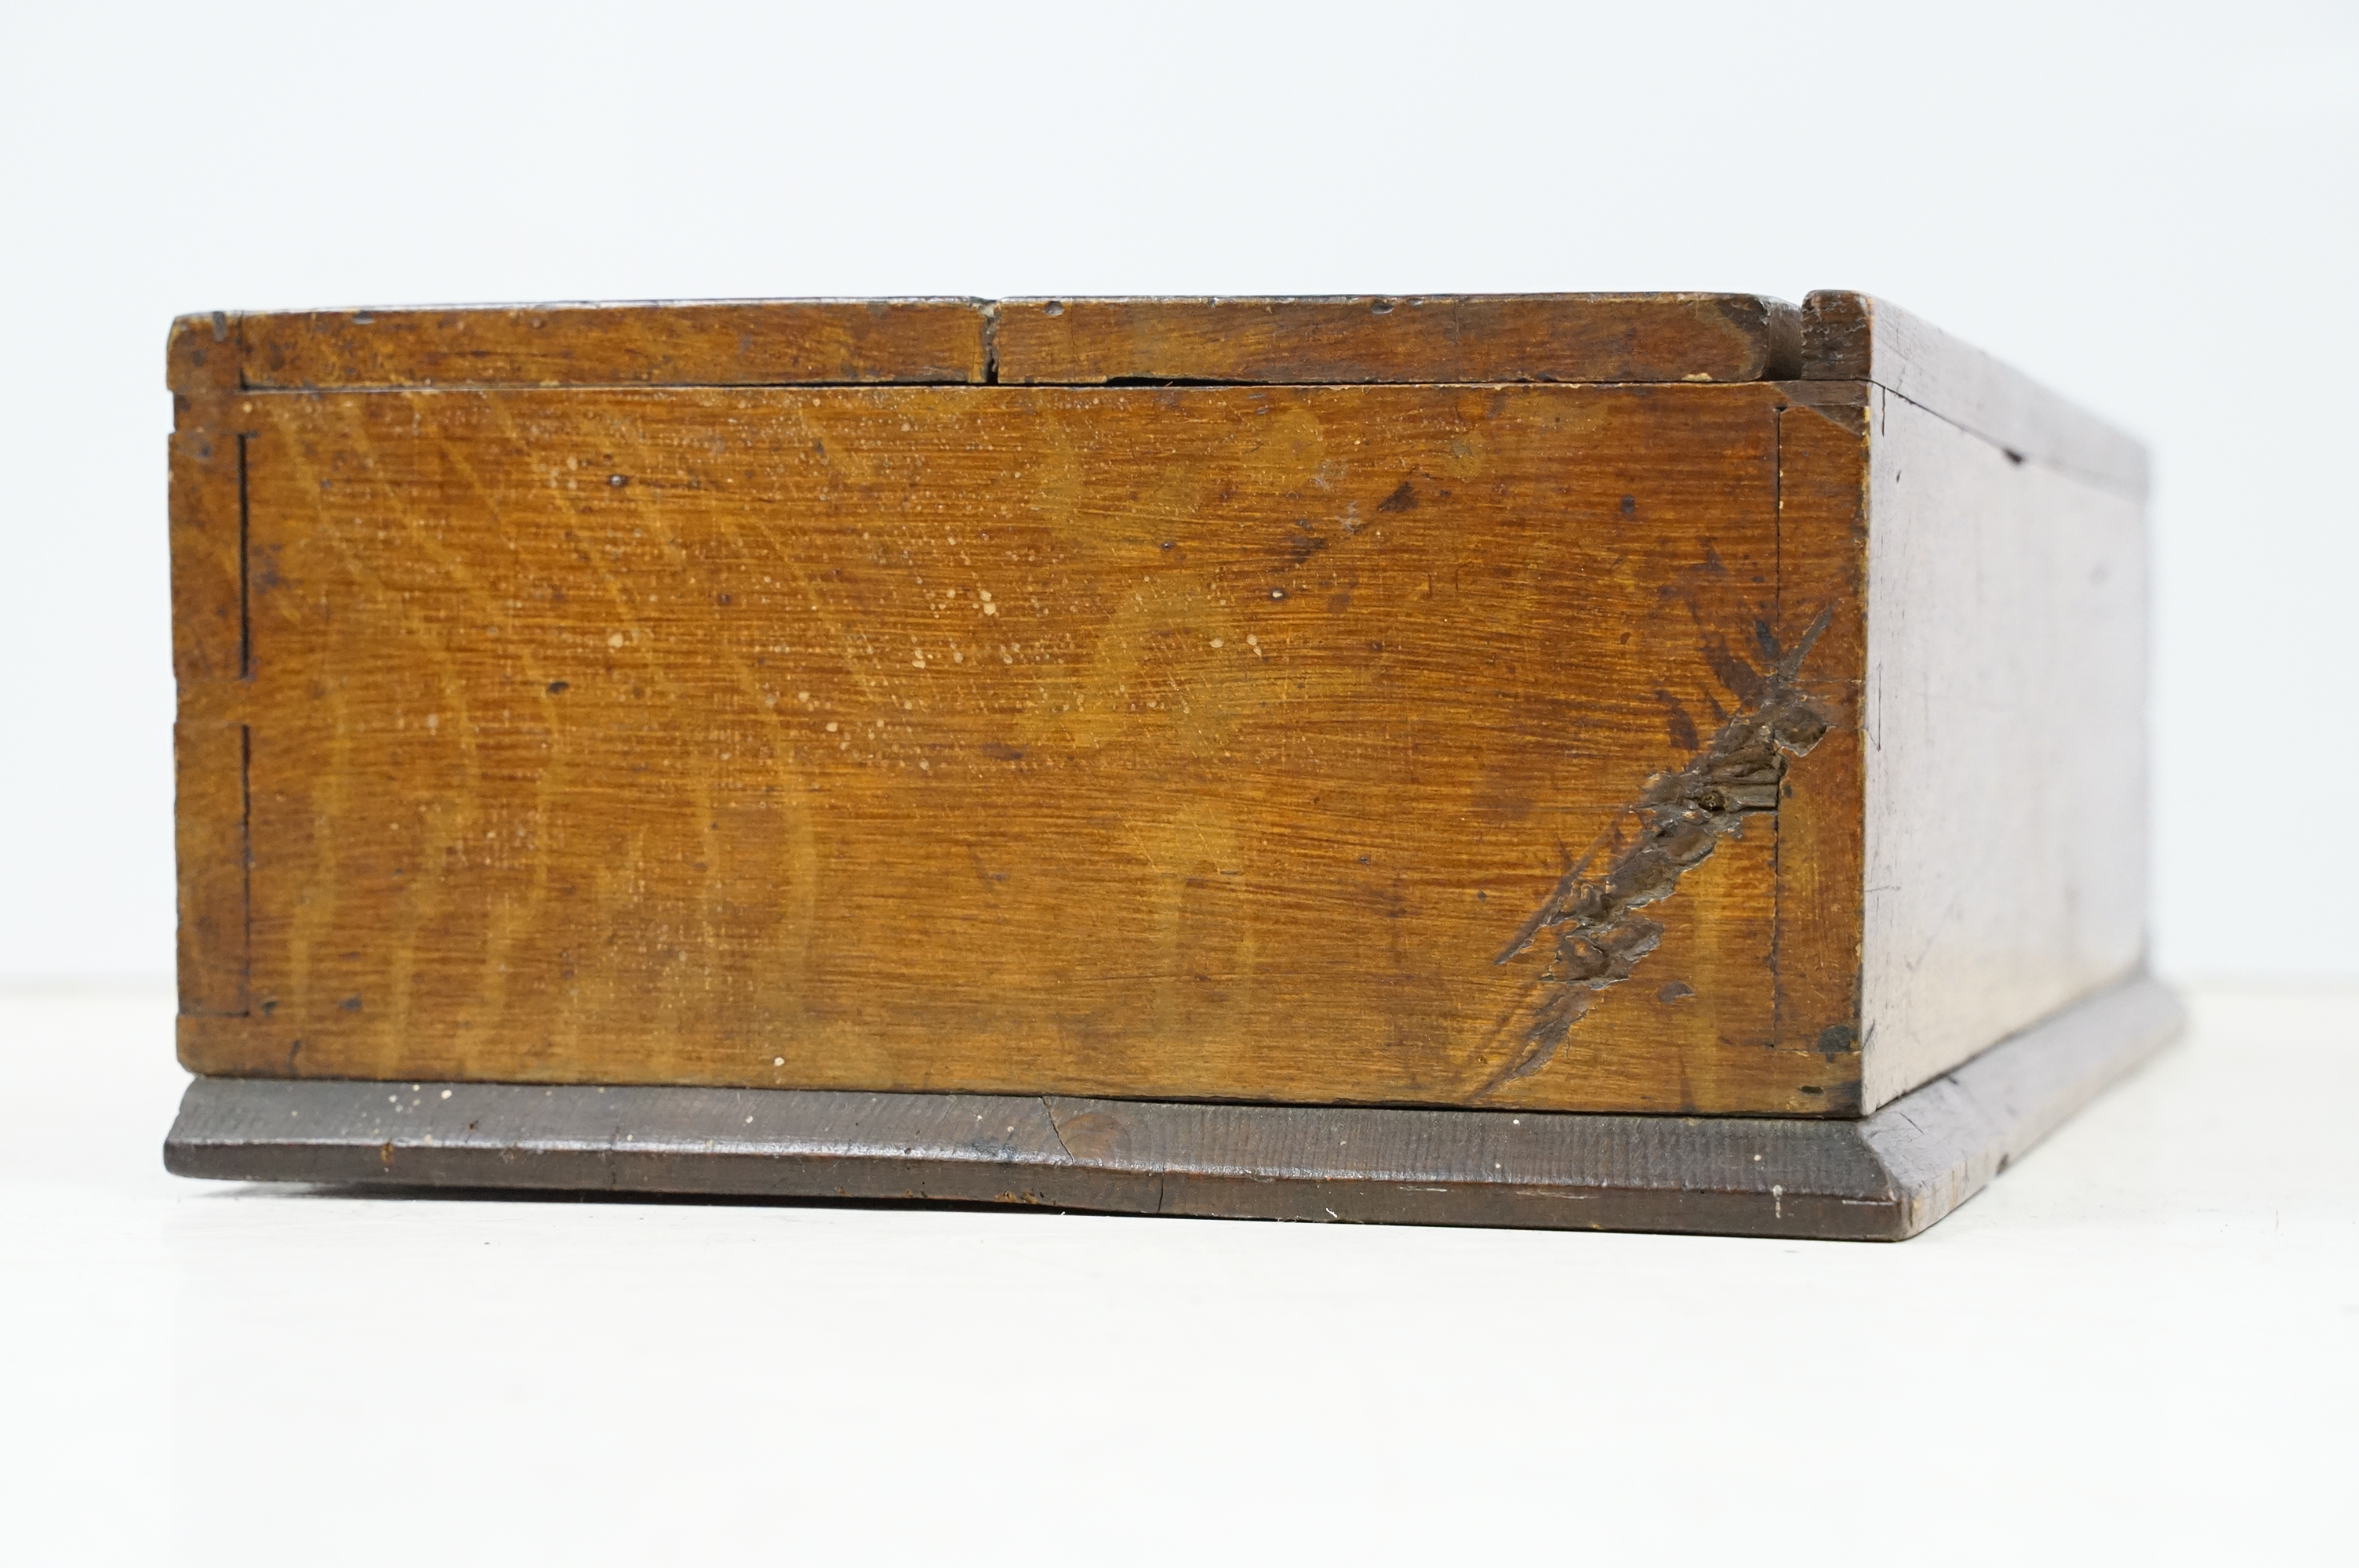 19th century Oak Bible or Documents Box with hinged lid - Image 6 of 6